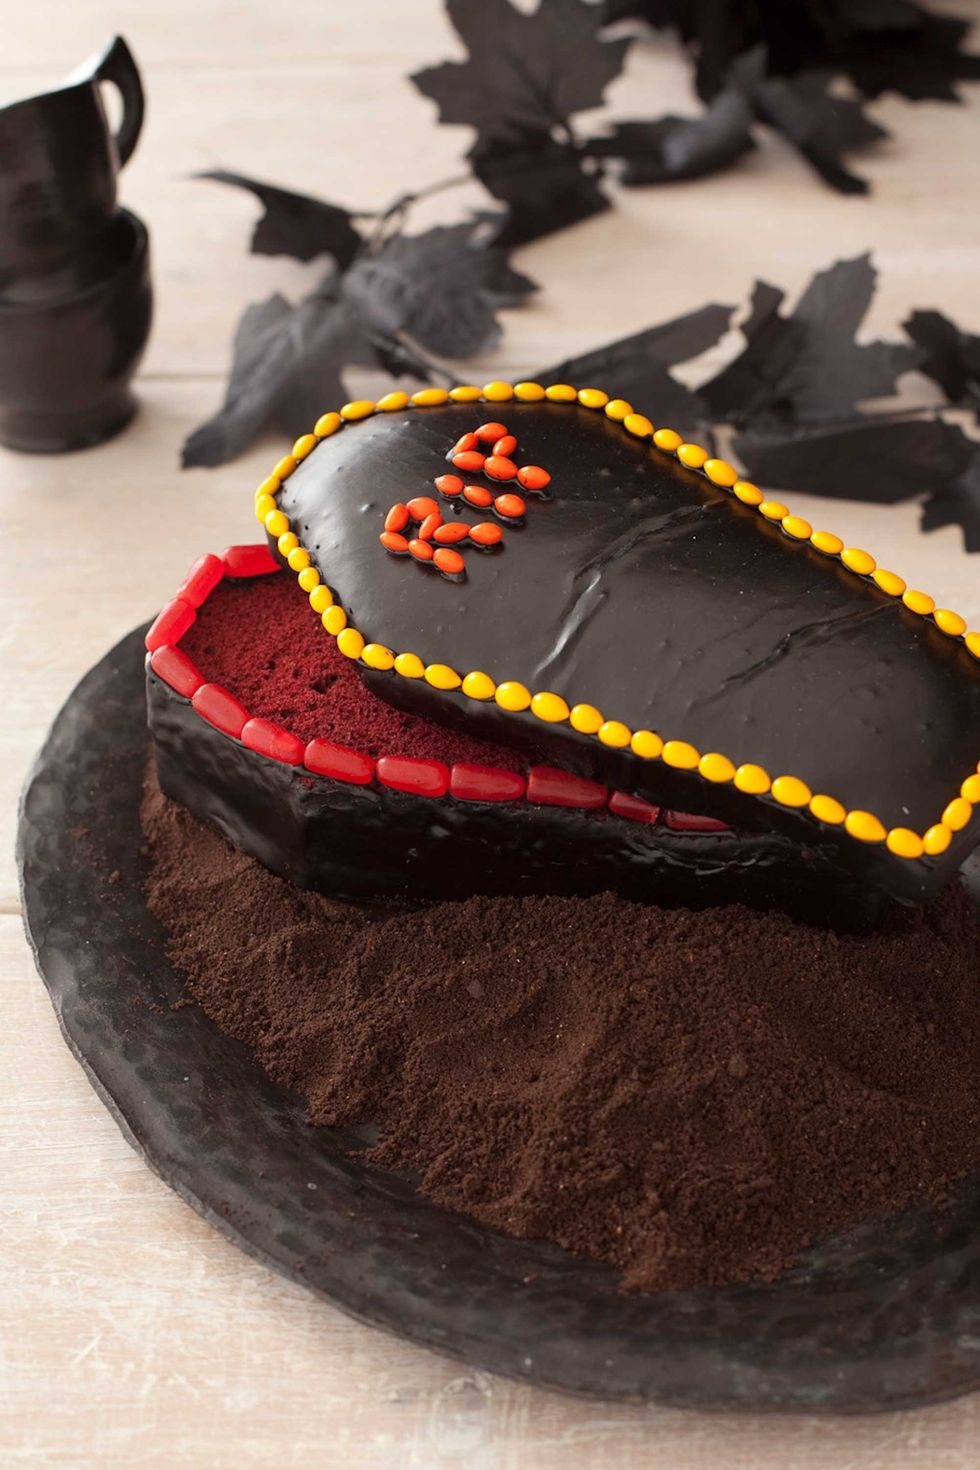 15 Simple Halloween Cake Ideas That You Can Do - Find Your Cake Inspiration